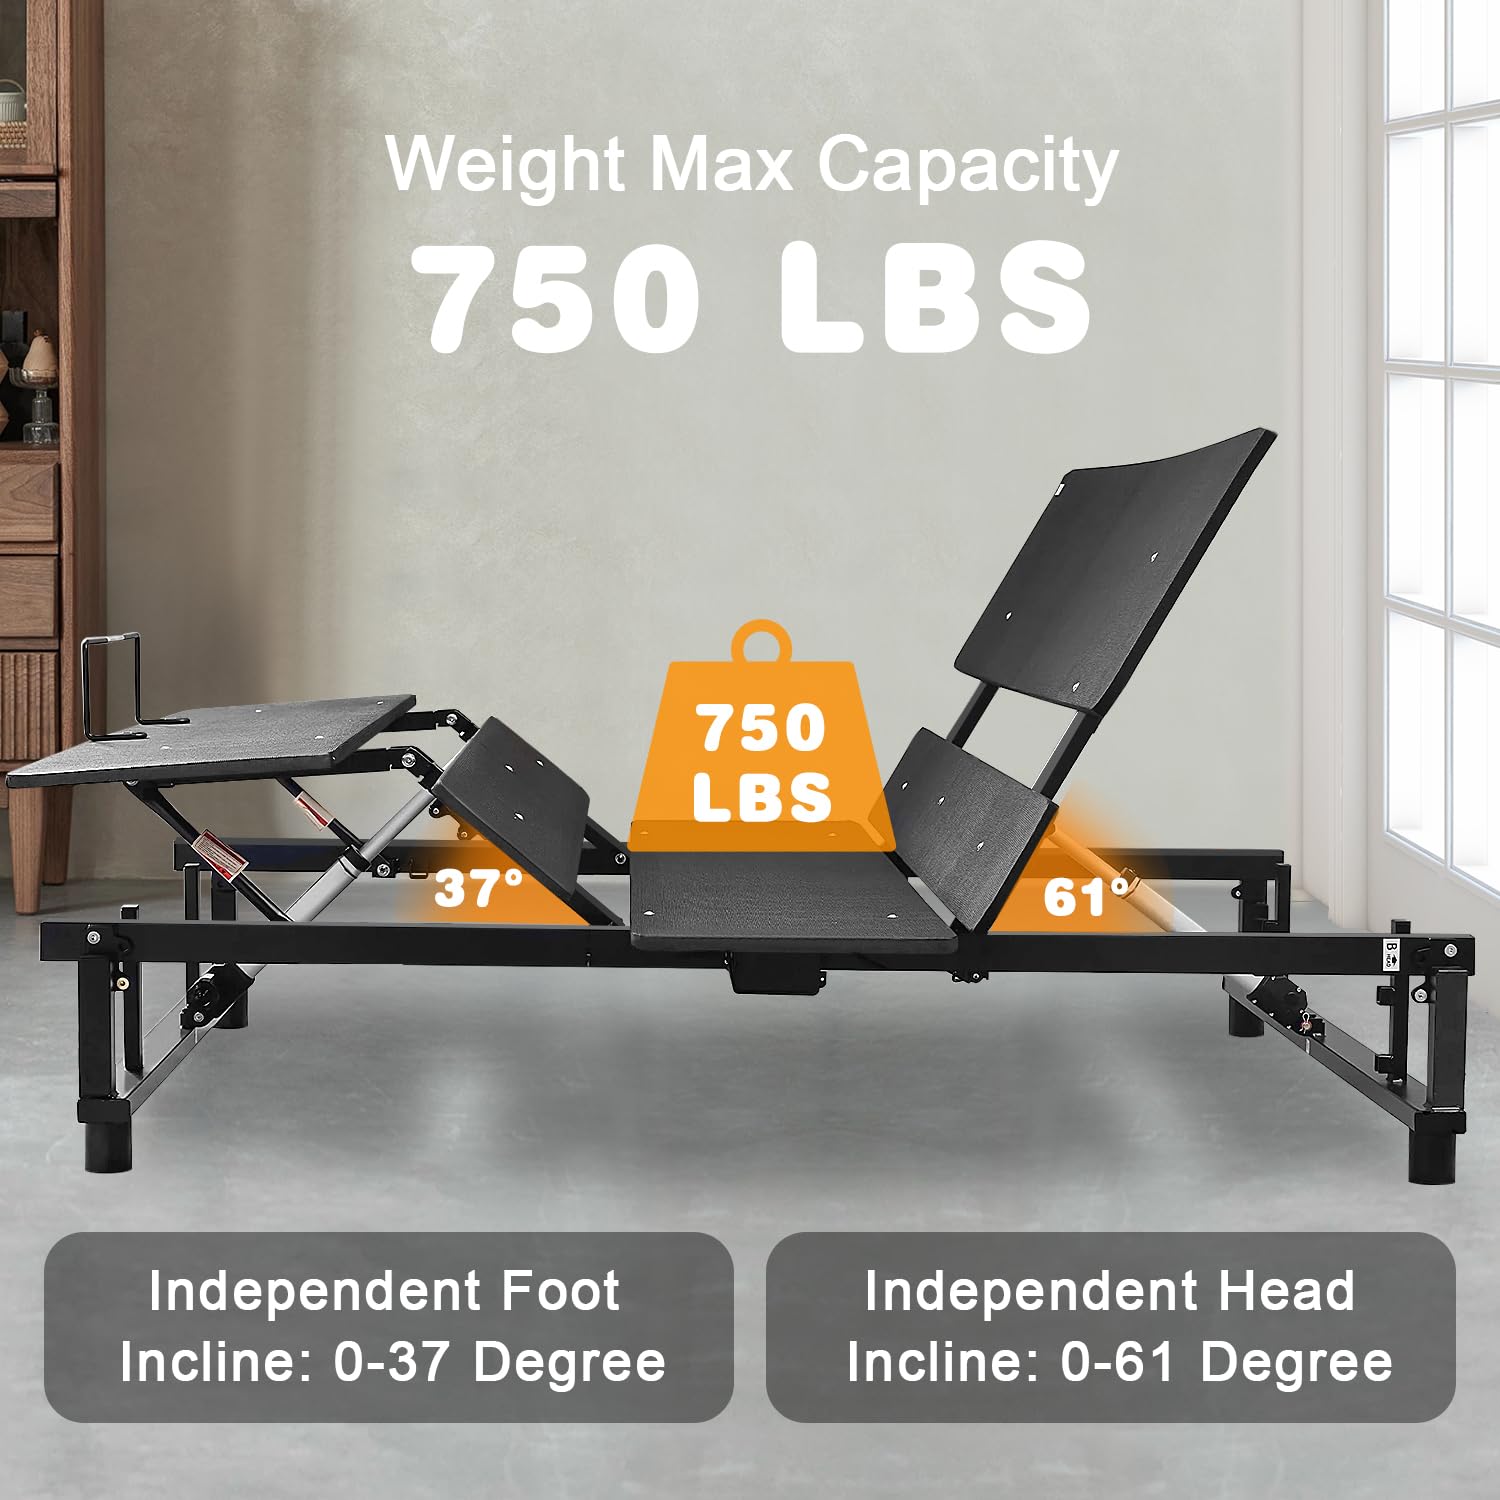 Lostcat Ergonomic Adjustable Bed Frame King Size, Zero Gravity Independent Head & Foot Incline, 750LB Weight Capacity Electric Bed Base with Wireless Remote, Easy Tool Free Assembly Bed Frame, Black